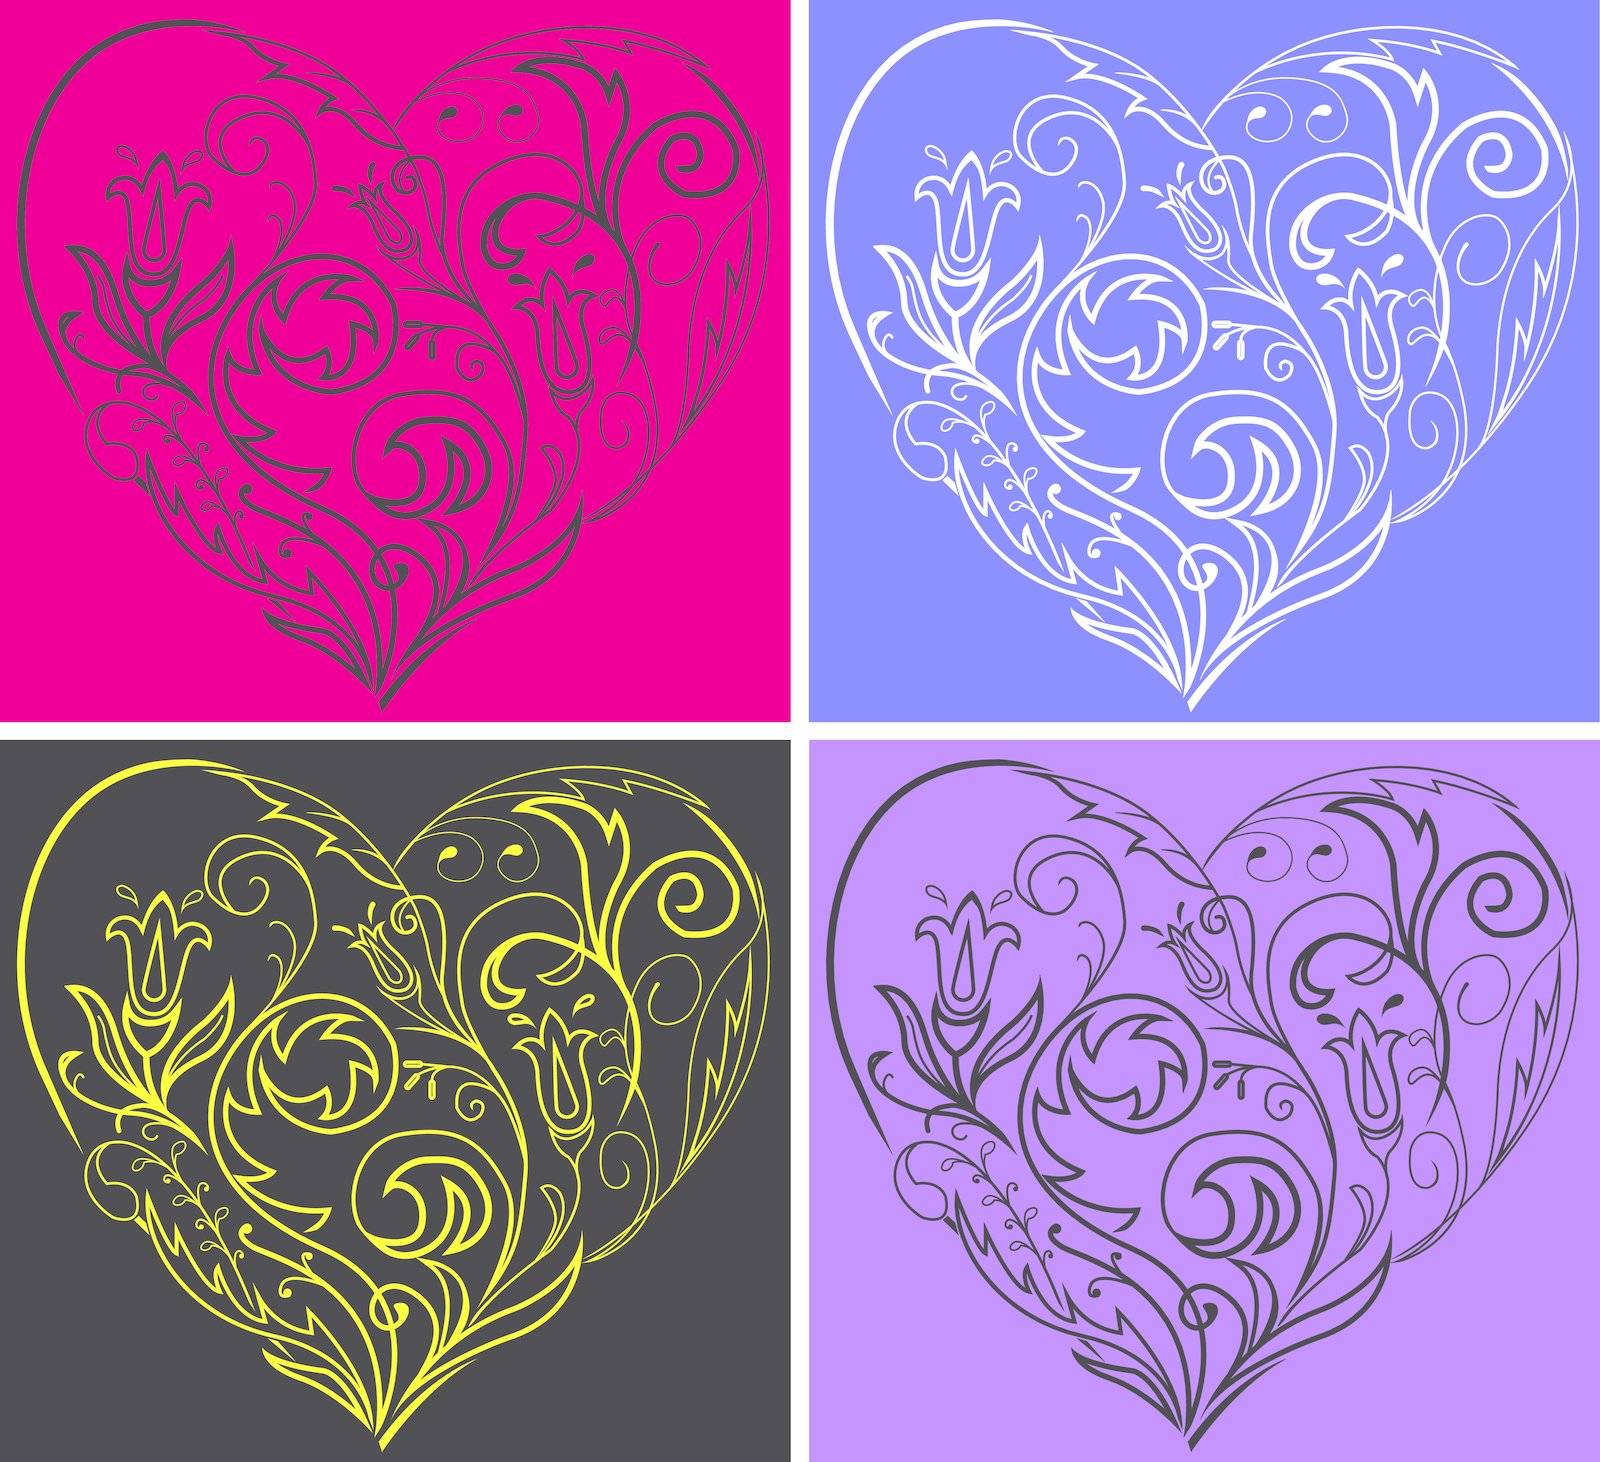 A set of multi-colored filigree hearts on colorful backgrounds